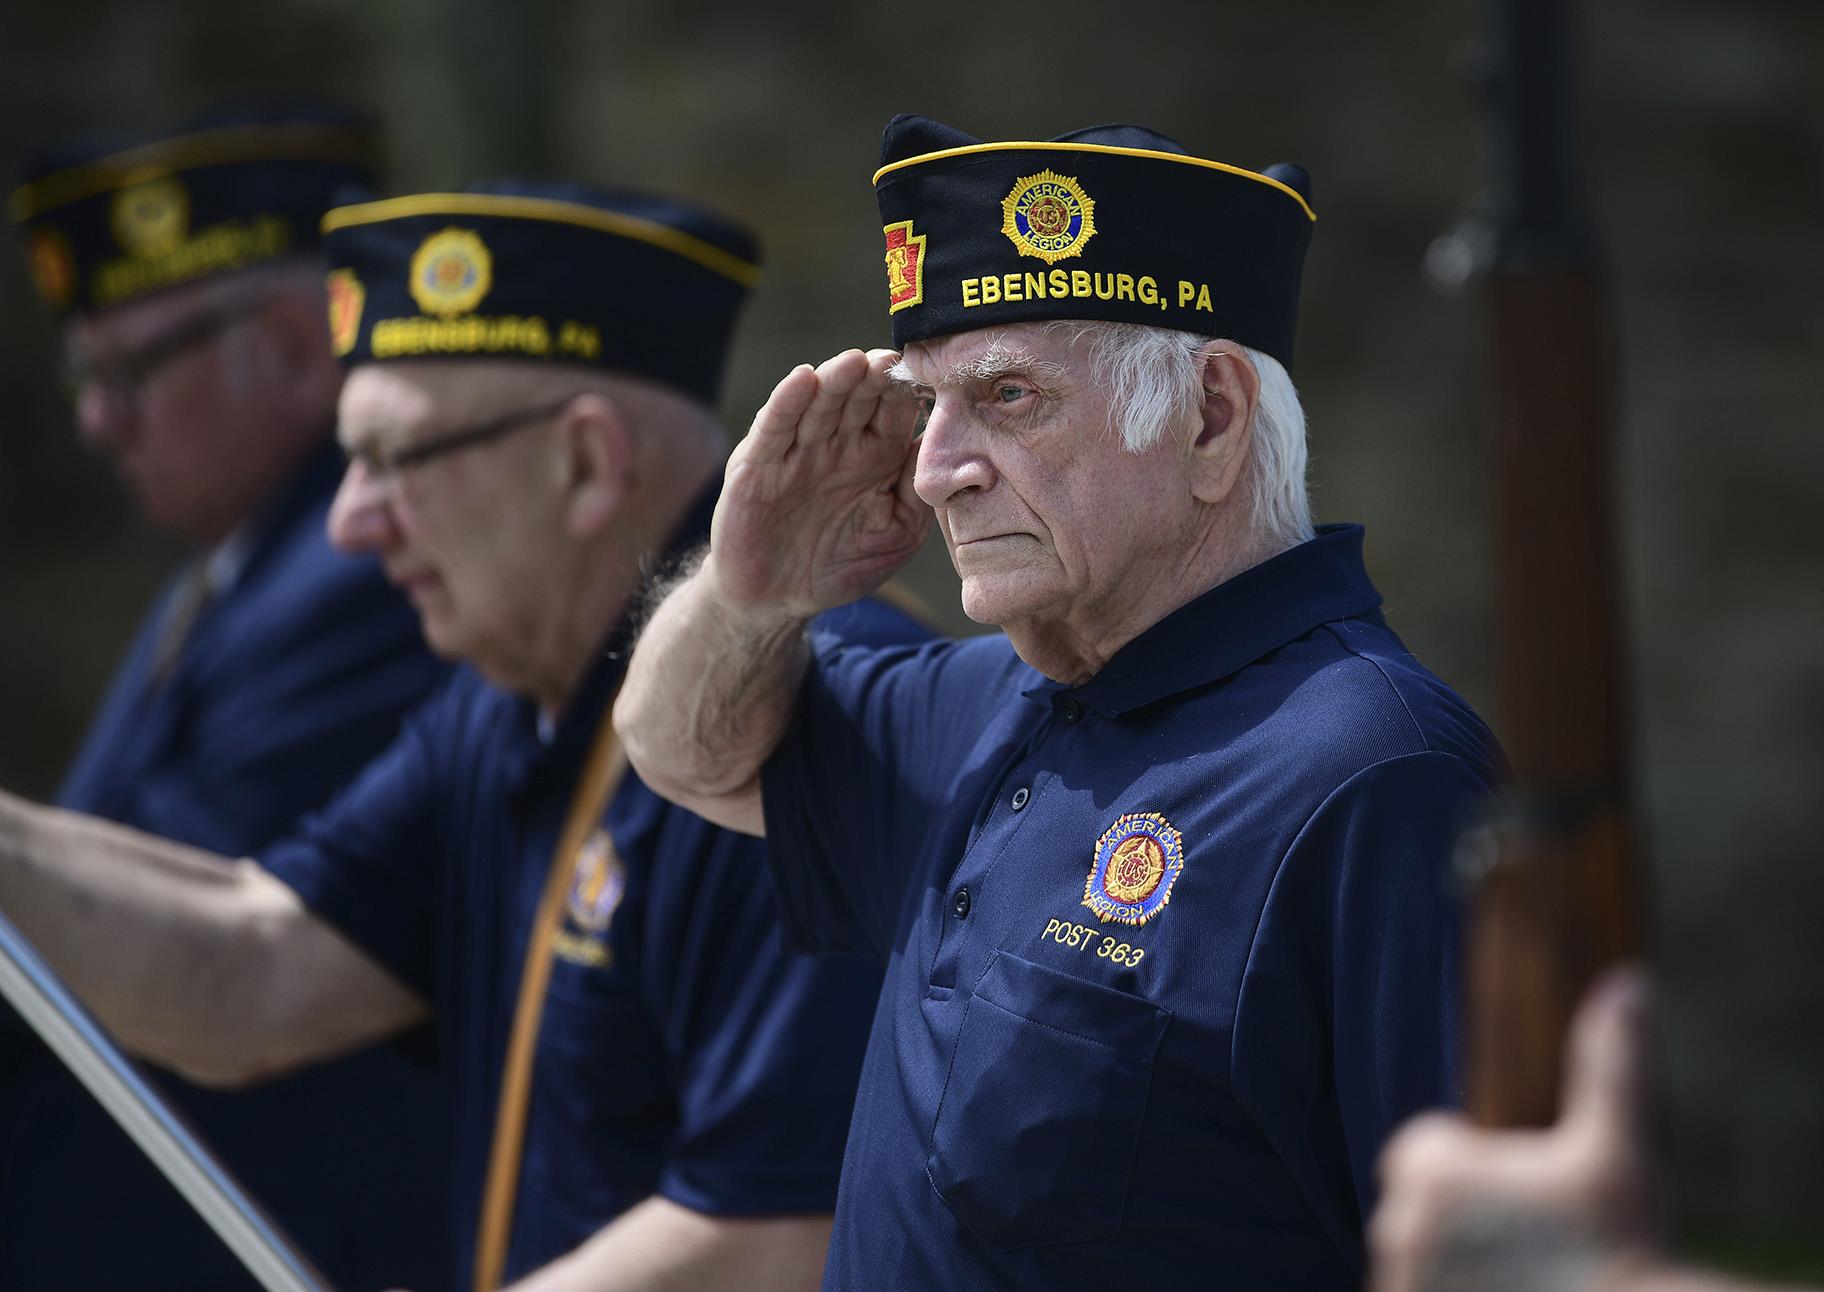 U.S. Army veteran Joseph Lesniak of Colver, Pa., salutes during the playing of Taps at a Memorial Day ceremony at Soldiers and Sailors Memorial Park, in Ebensburg, Pa., Monday, May 25. 2020. (John Rucosky / The Tribune-Democrat via AP)